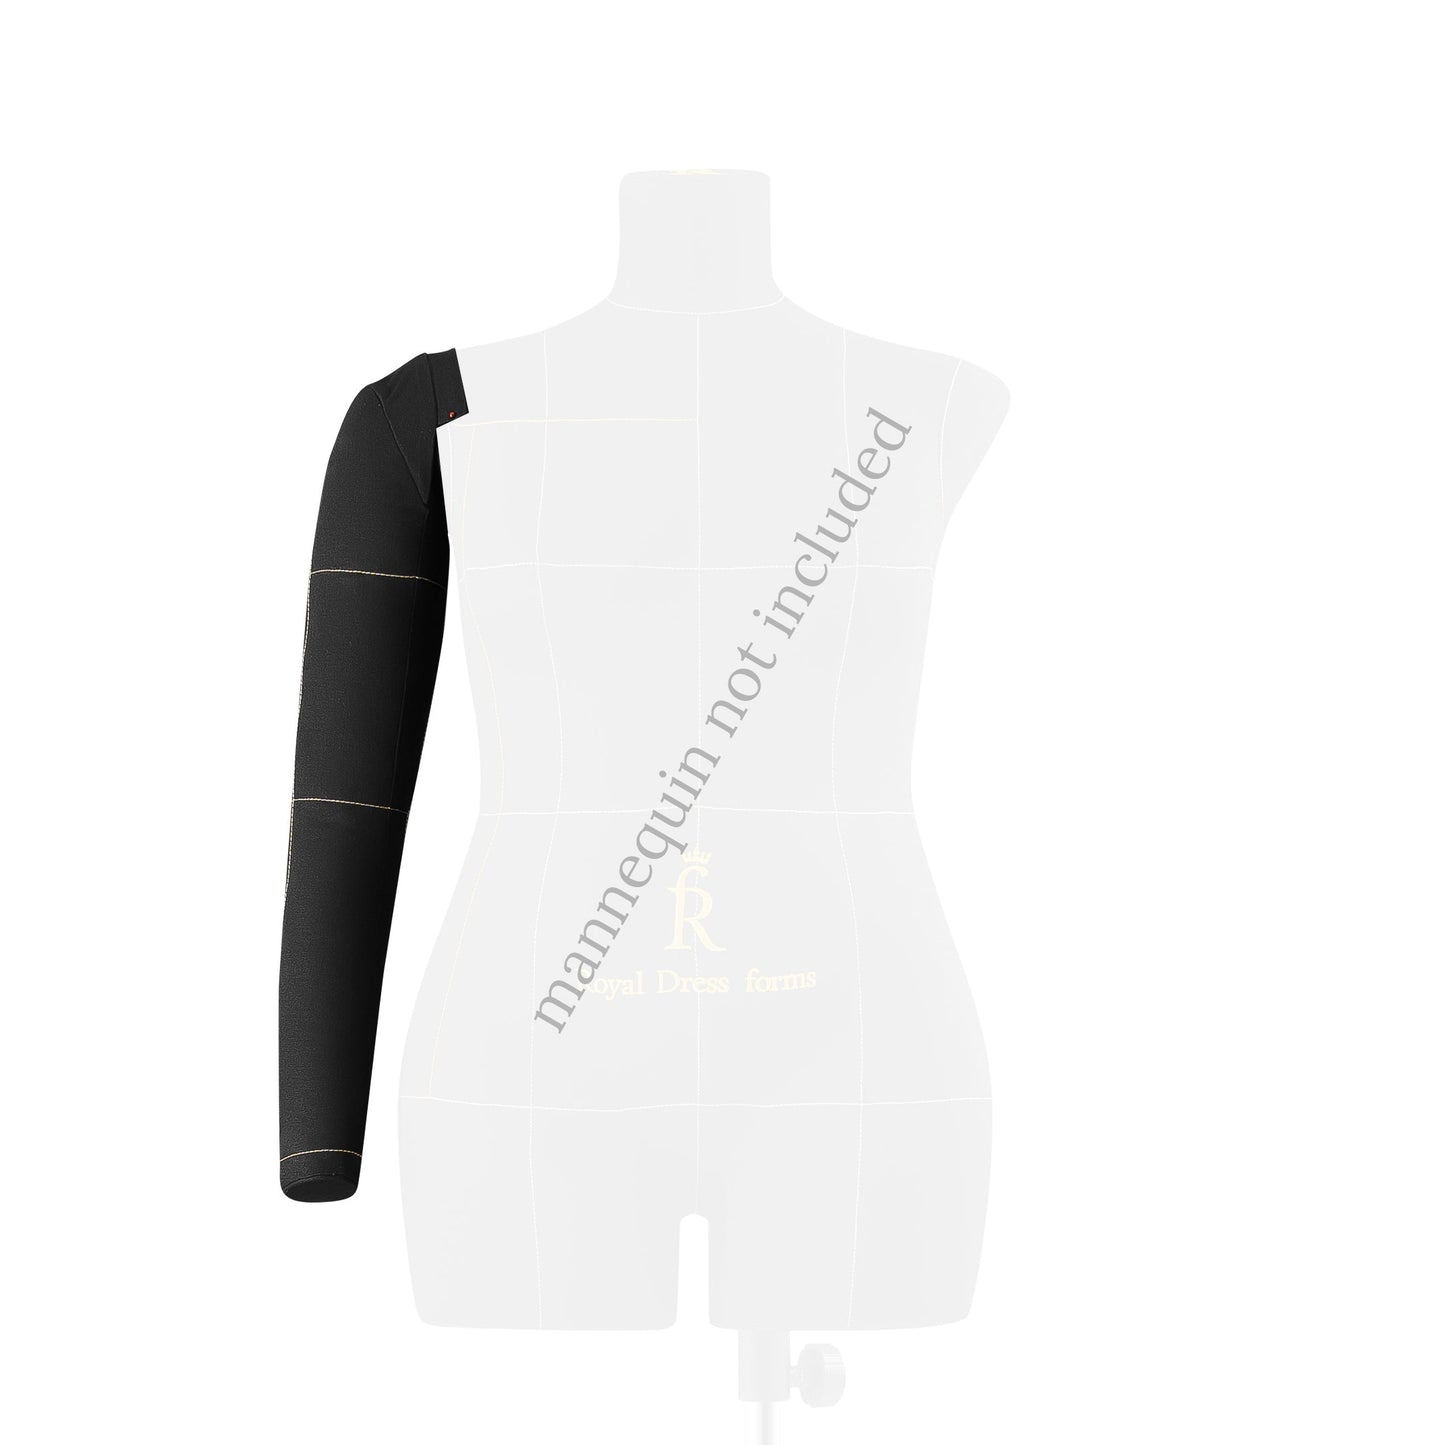 Right Arm for dress form